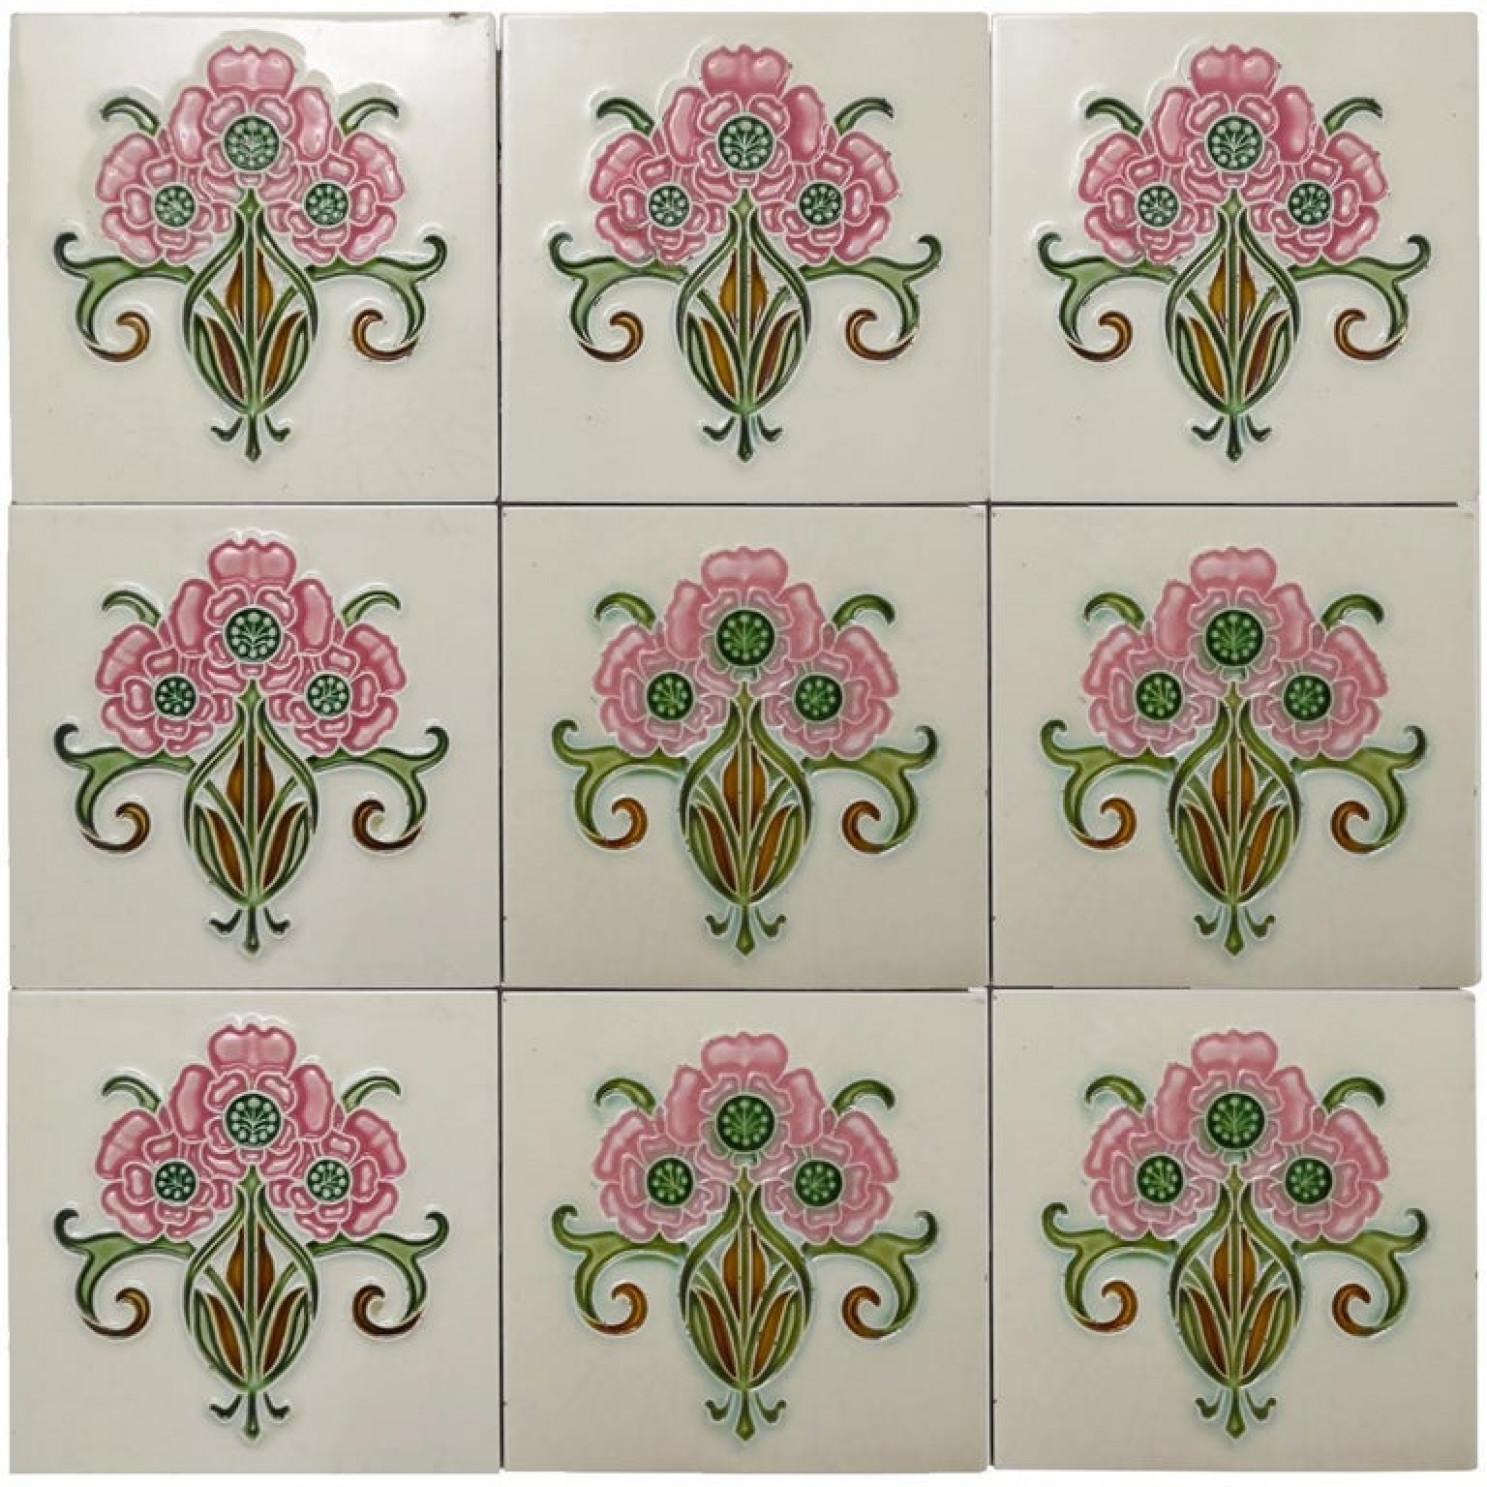 This is an amazing set of antique Art Nouveau handmade tiles. A beautiful relief and a rich rose green, brown and creme color. These tiles would be charming displayed on easels, framed or incorporated into a custom tile design.

Please note that the